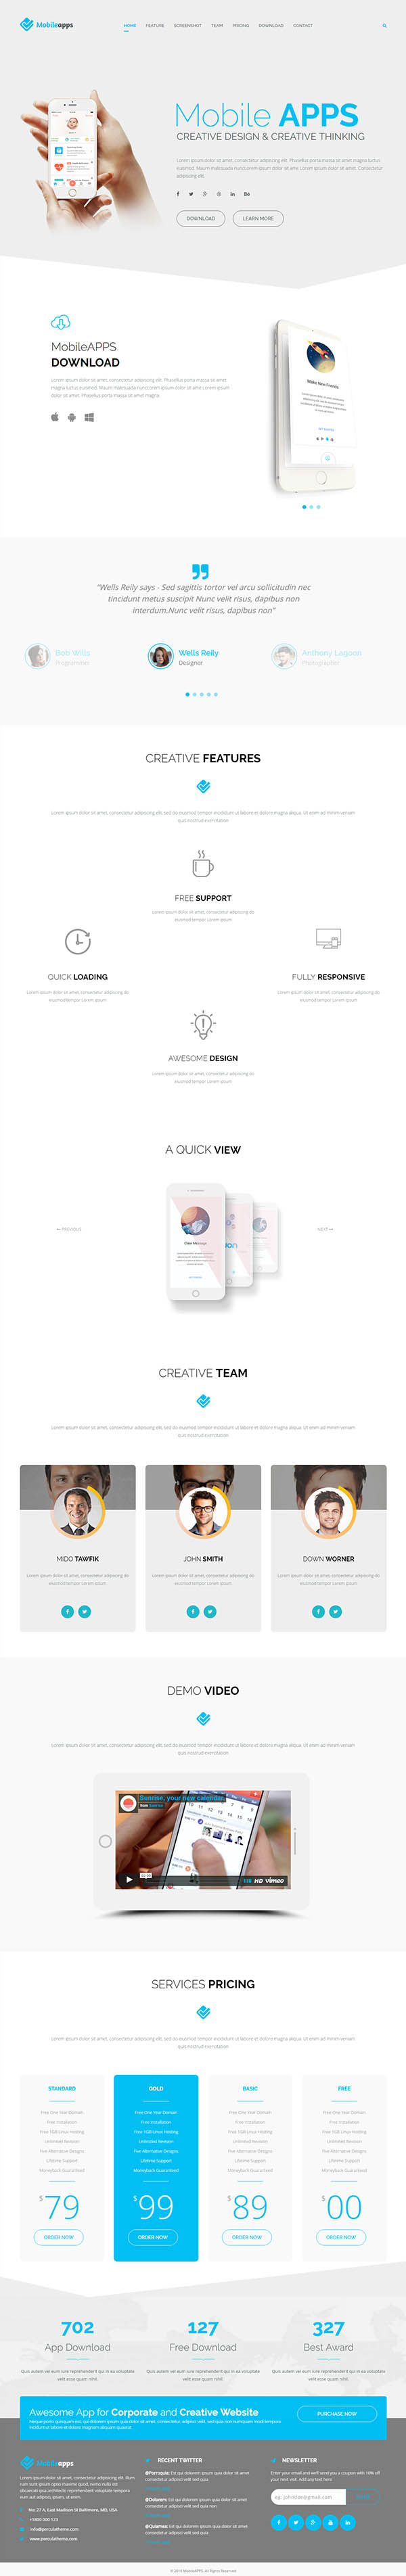 MobileApps – Responsive Mobile App Landing Page-HTML Template